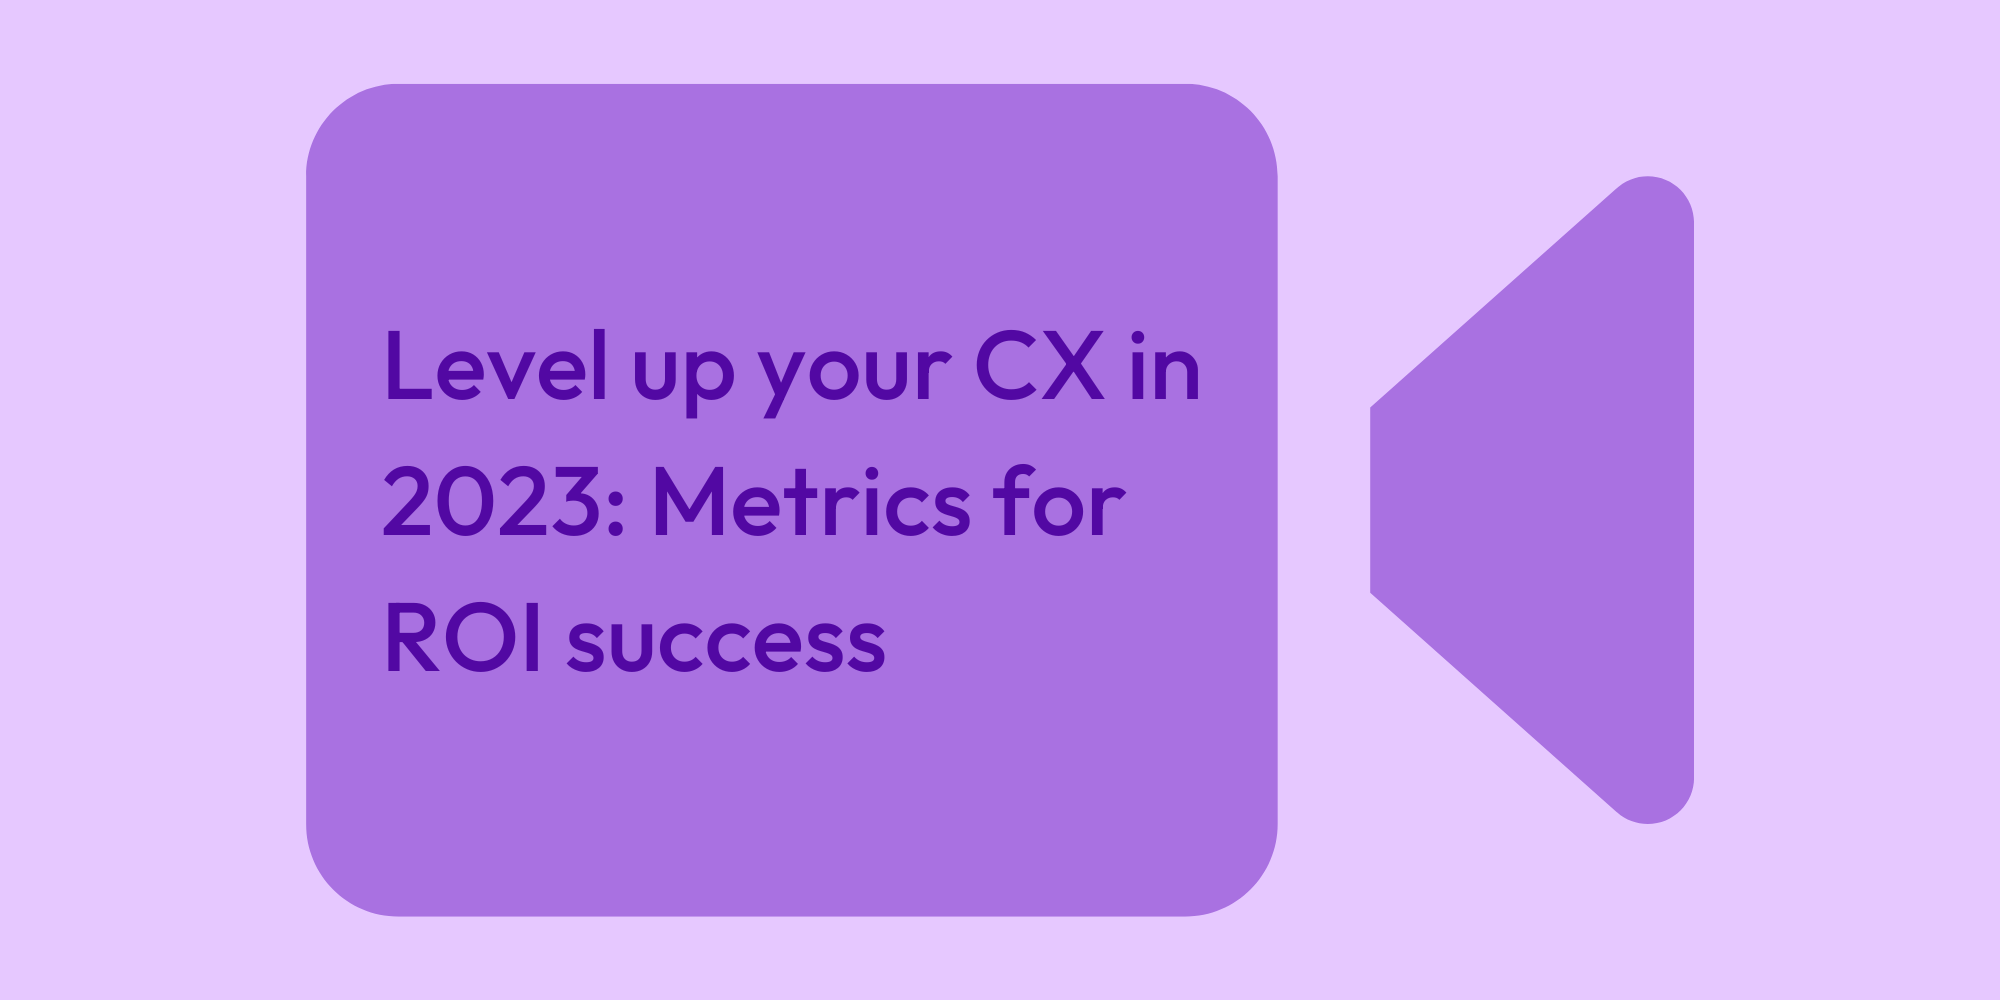 Level up your CX in 2023 Metrics for ROI success